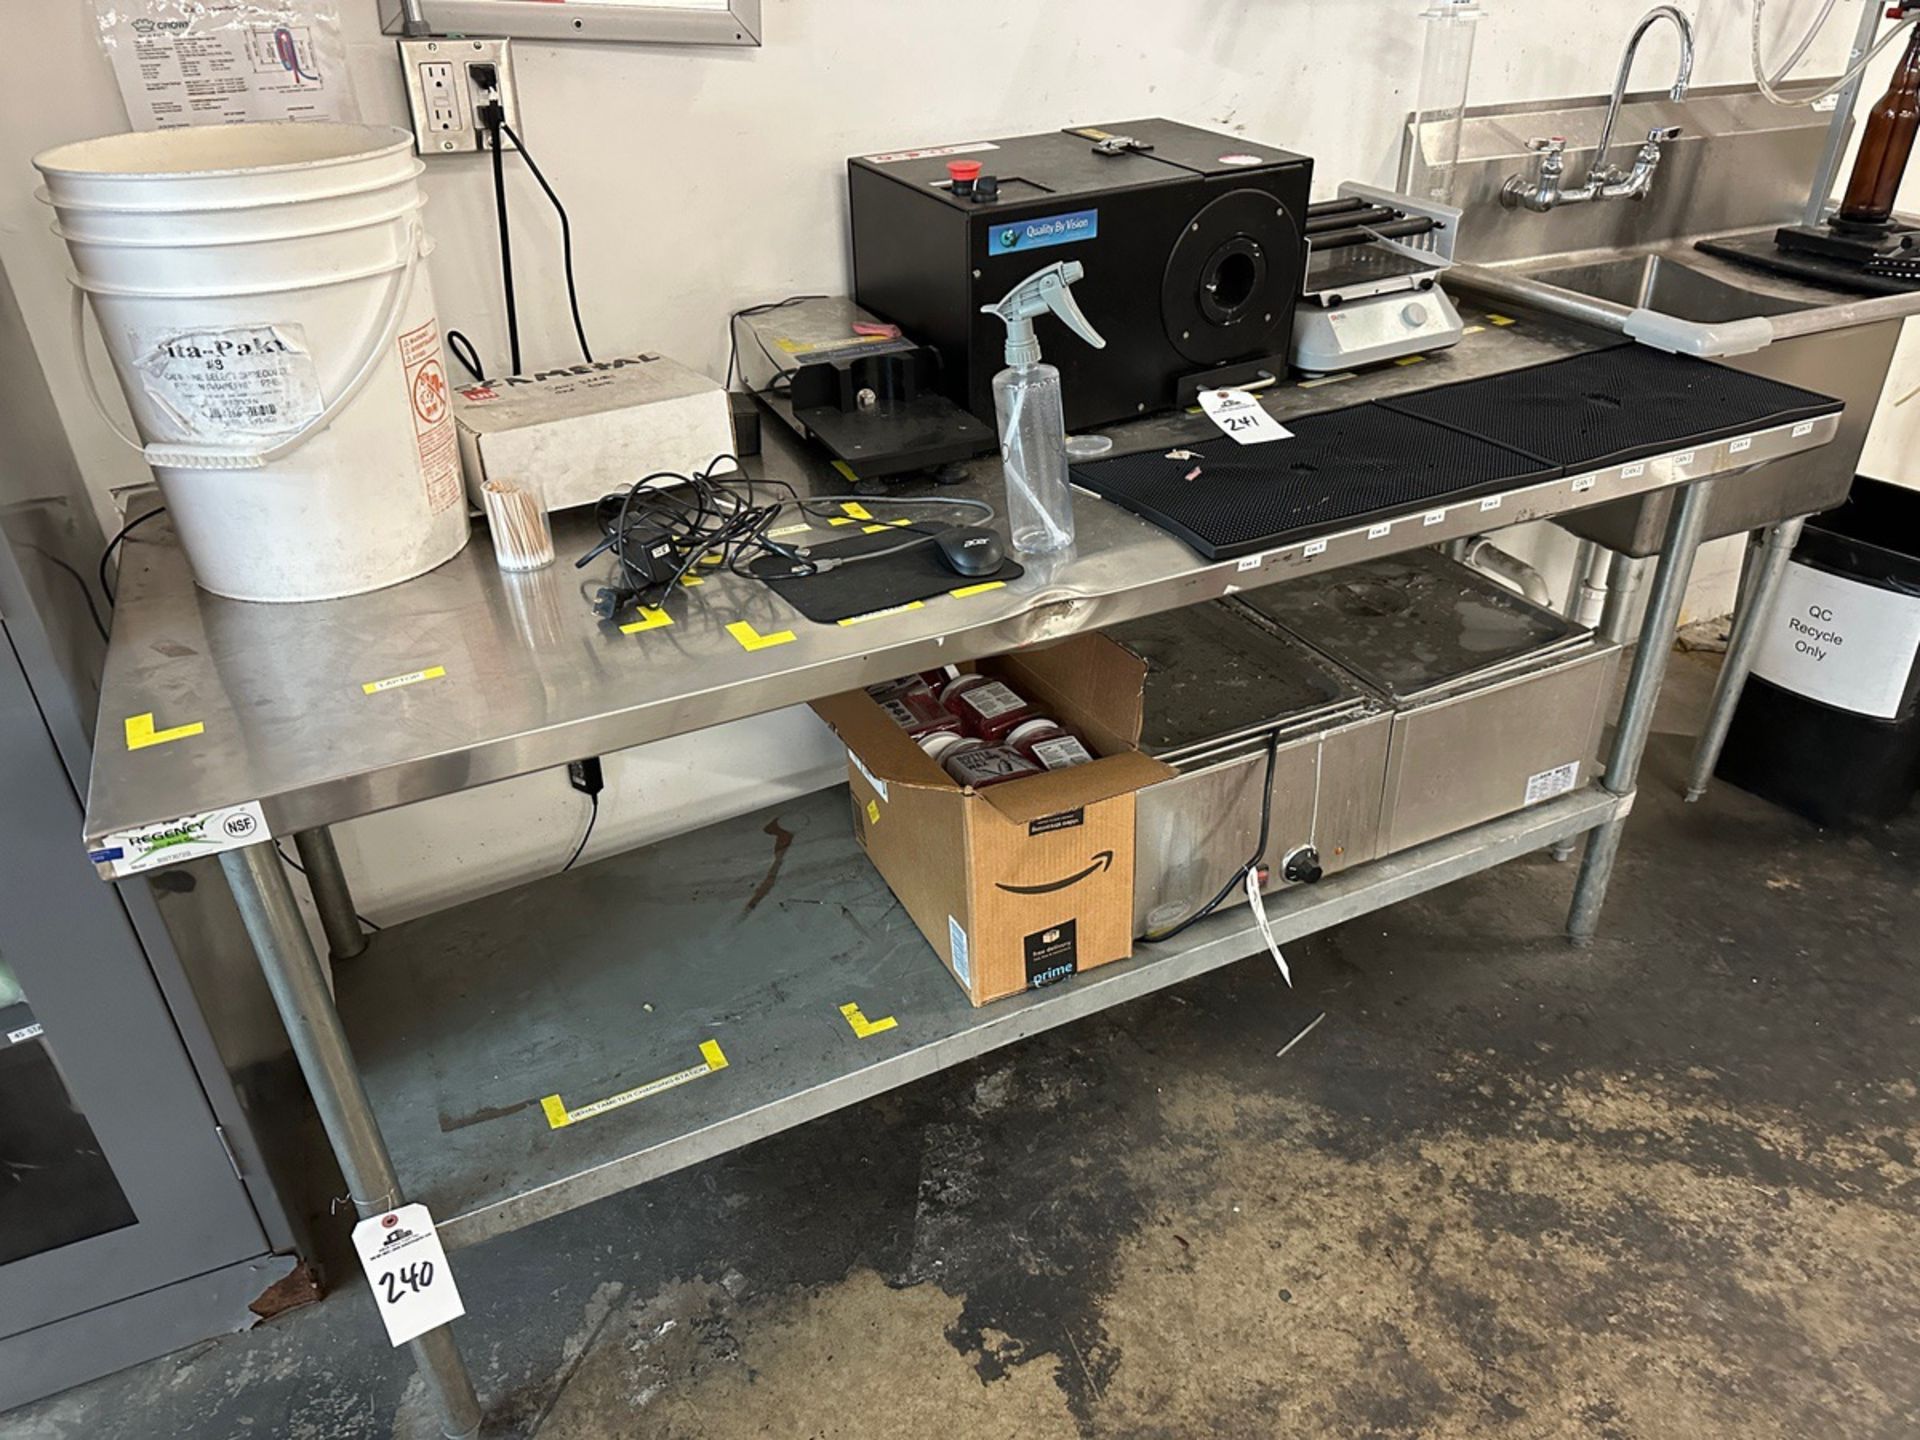 Stainless Steel Table with Shelf (No Contents)(Approx. 30"" x 6') | Rig Fee $50